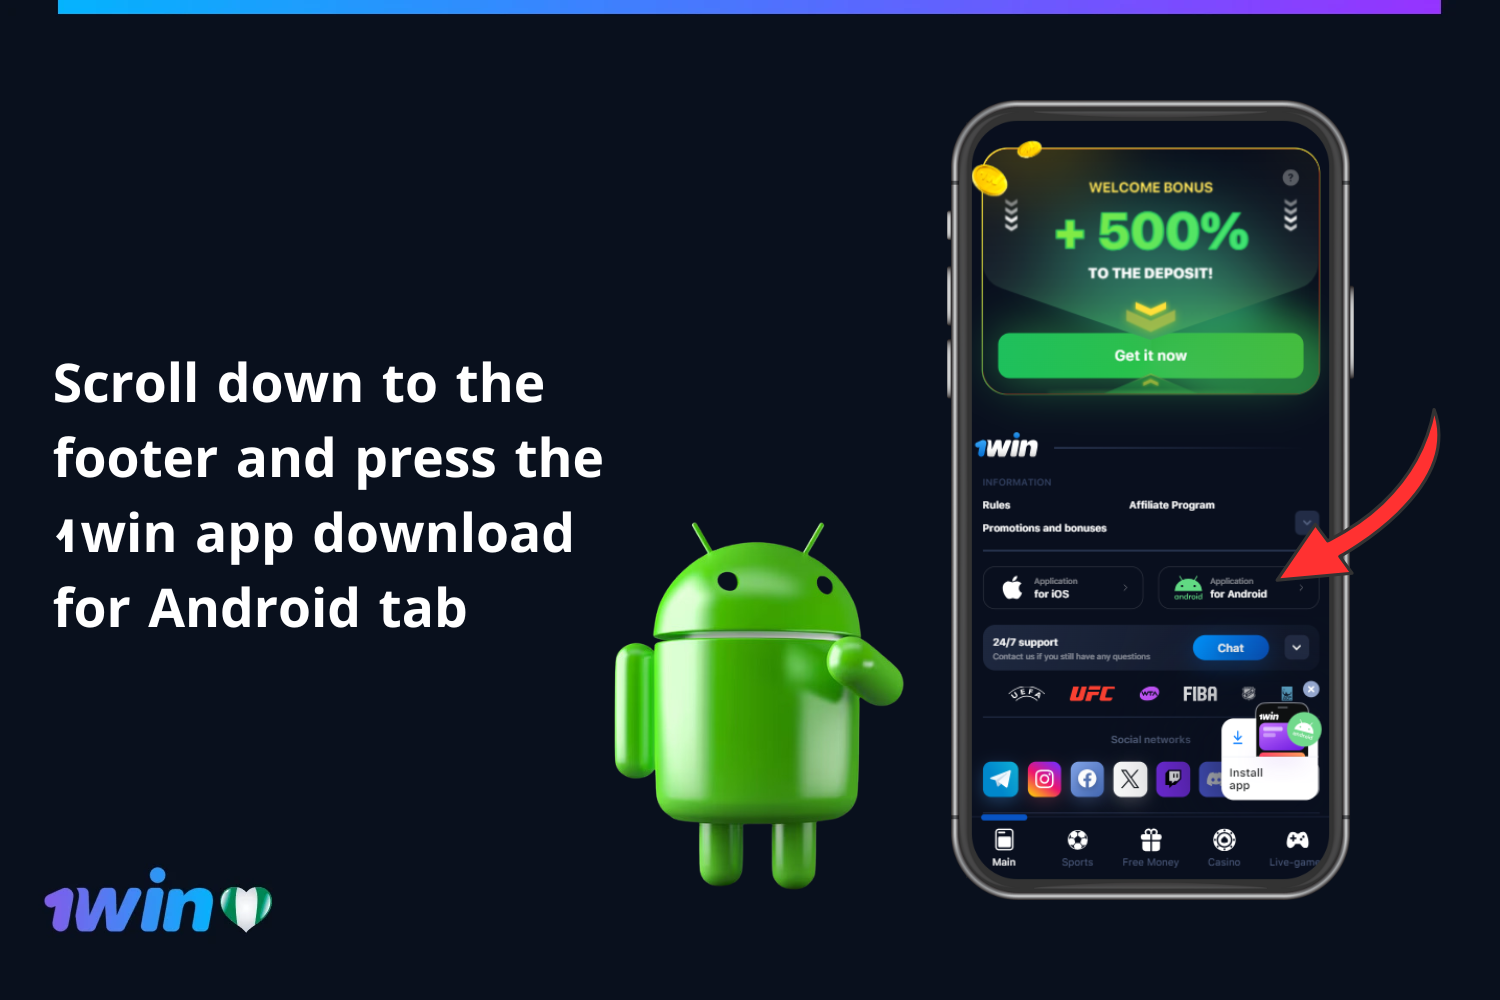 To download the app to an Android device, a user from Nigeria should scroll down the main page of the website and click on the 1win app download for the Android tab